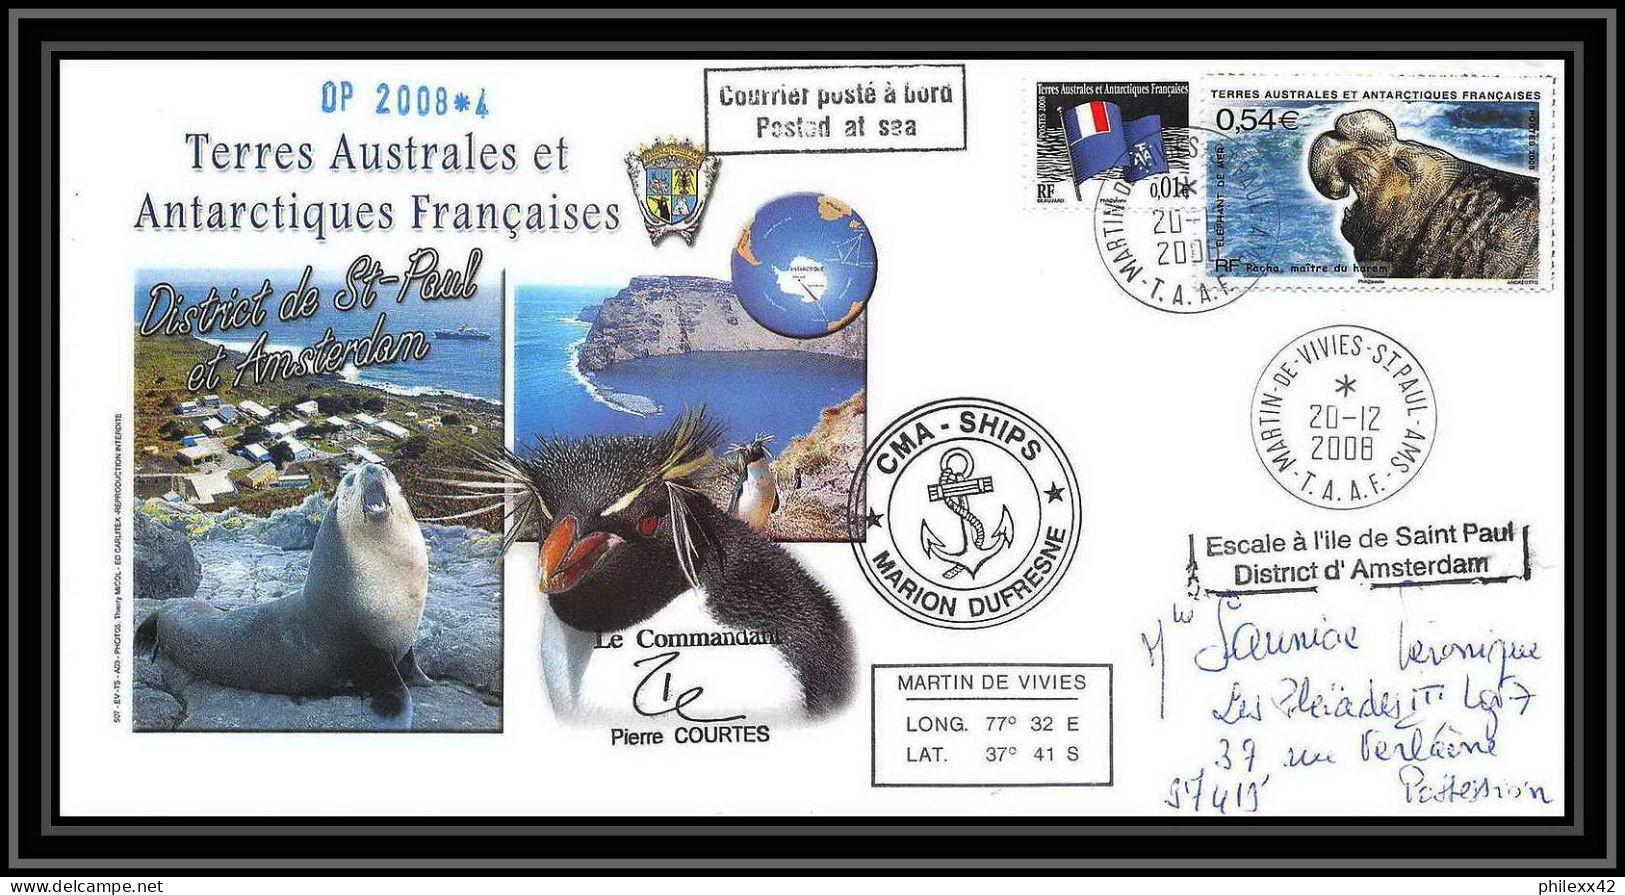 2871 Sea Elephant Terres Australes TAAF Helilagon Lettre Cover Dufresne Signé Signed Op 2008/4 St Paul 20/12/2008 N°511 - Helikopters